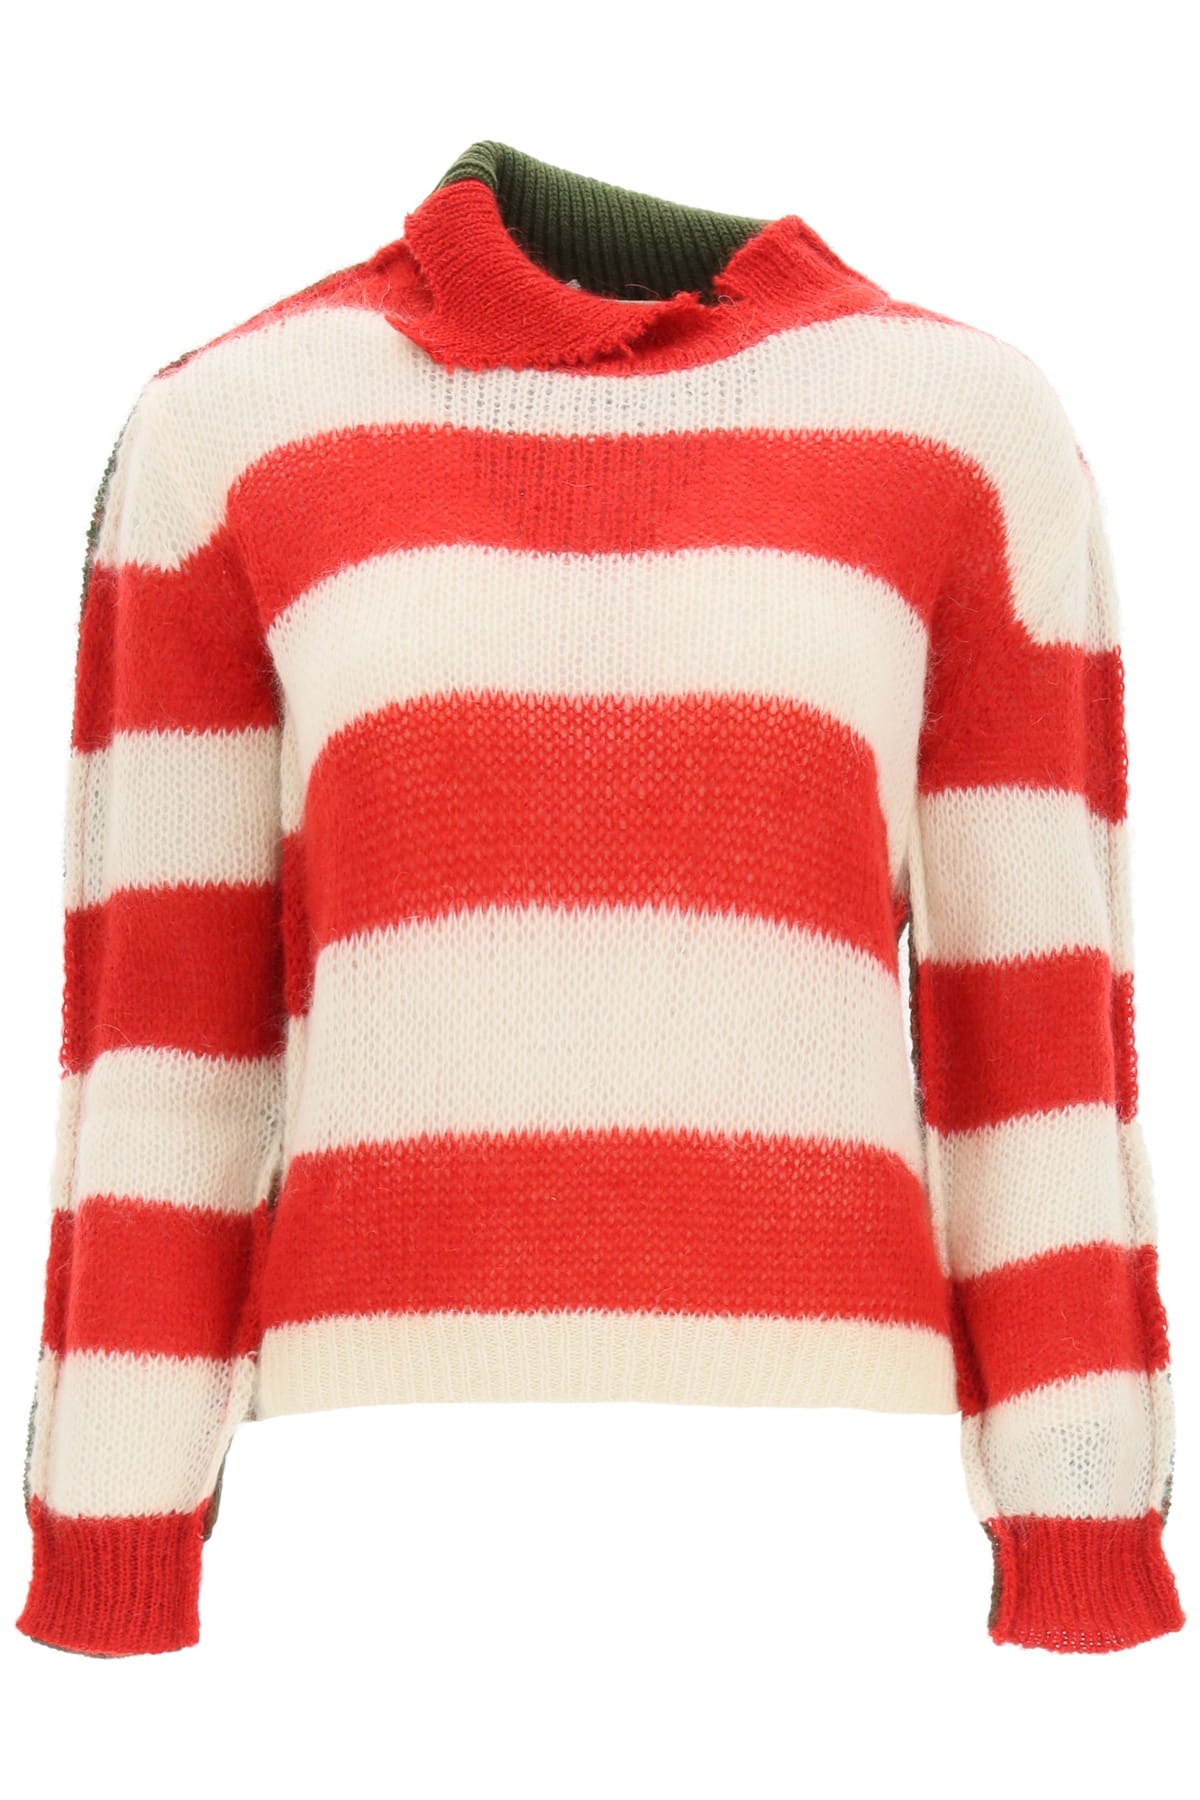 Marni Turtleneck Sweater In Striped Wool And Mohair